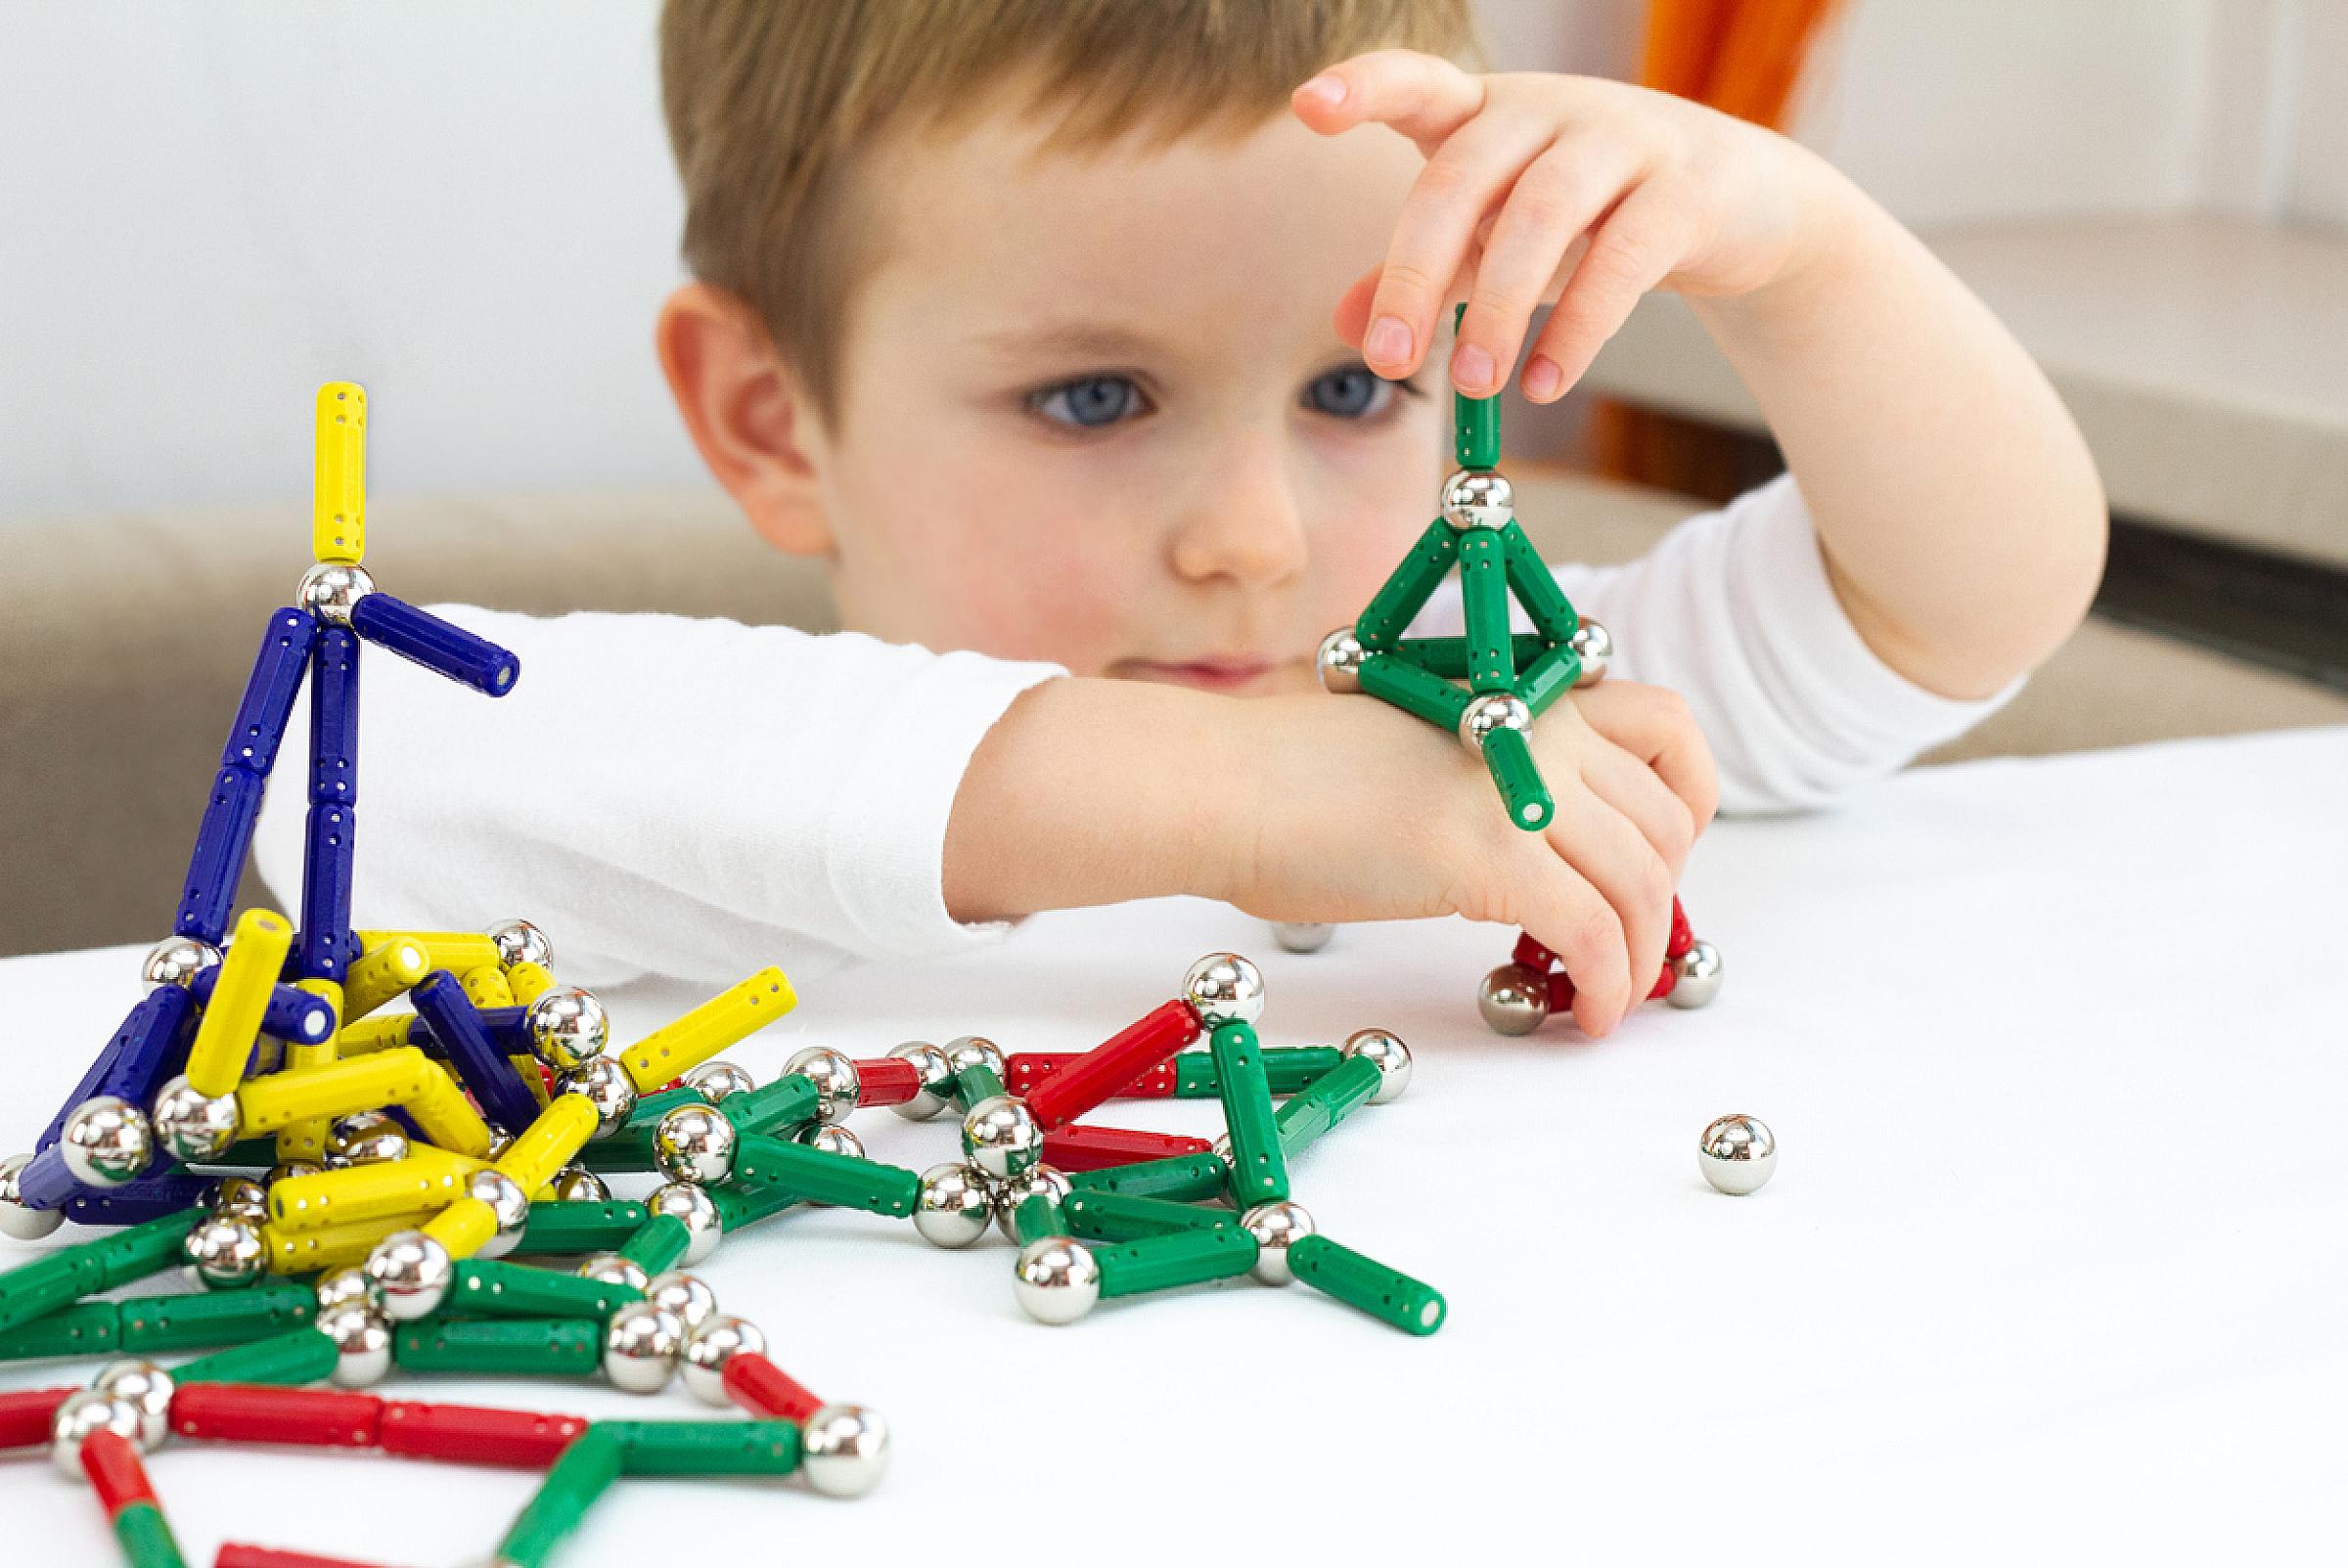 Child playing with toy magnets